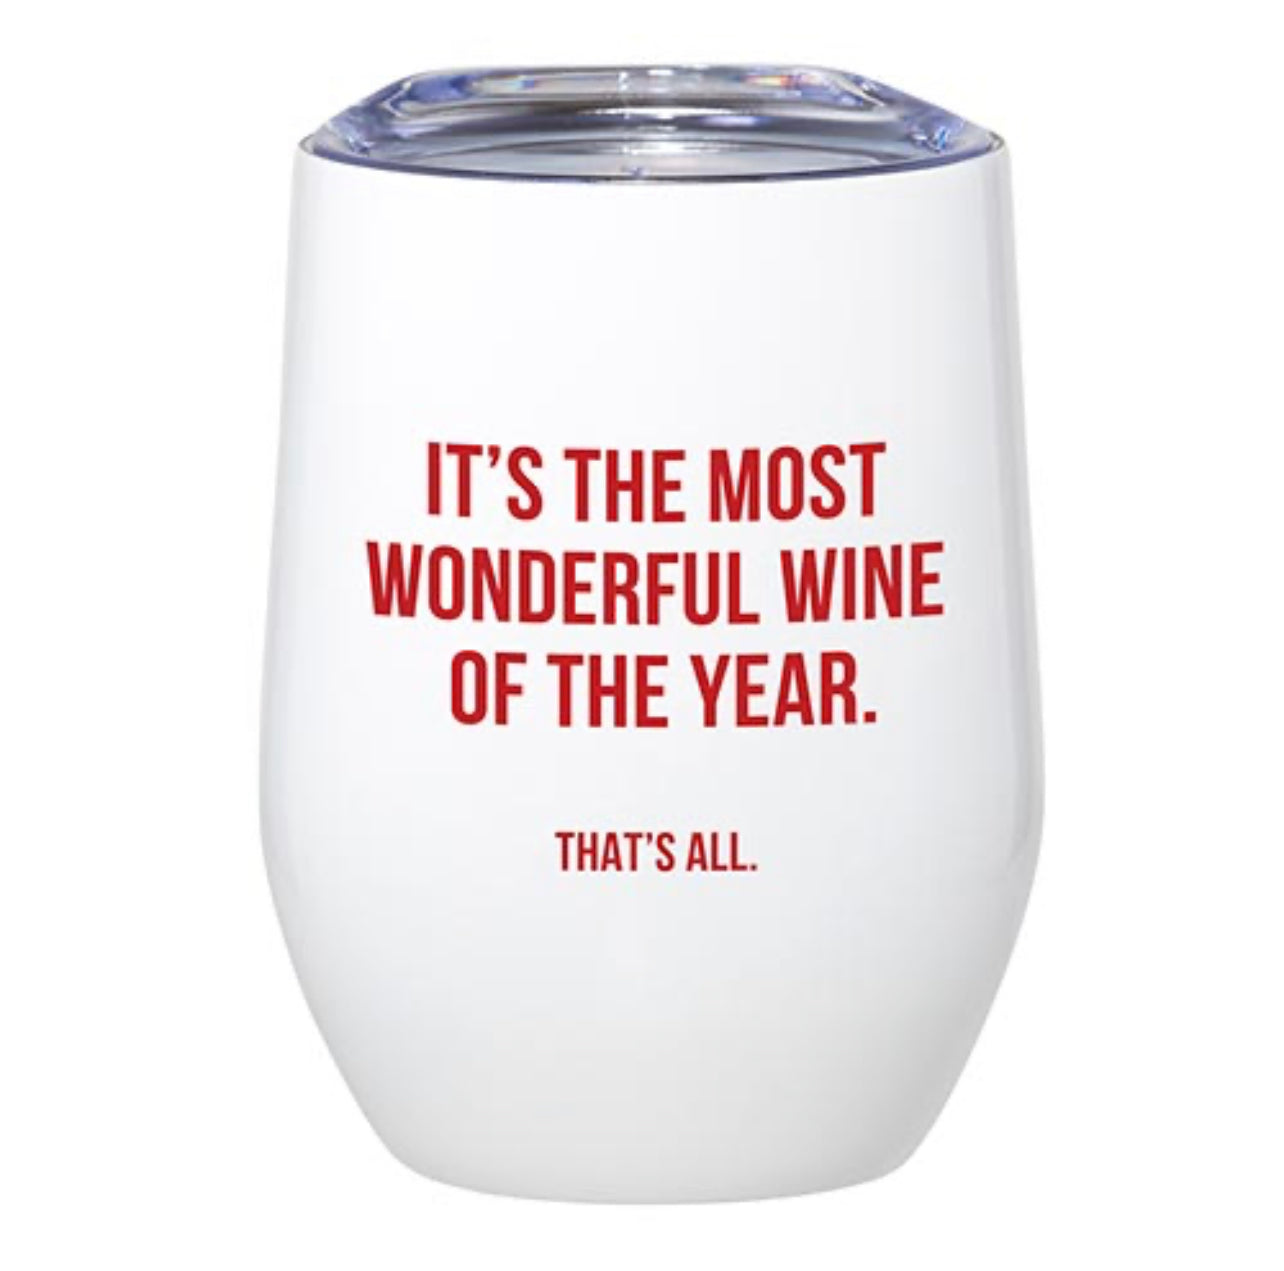 12 oz white christmas wine tumbler with words in red that read "It's the most wonderful wine of the year - that's all"